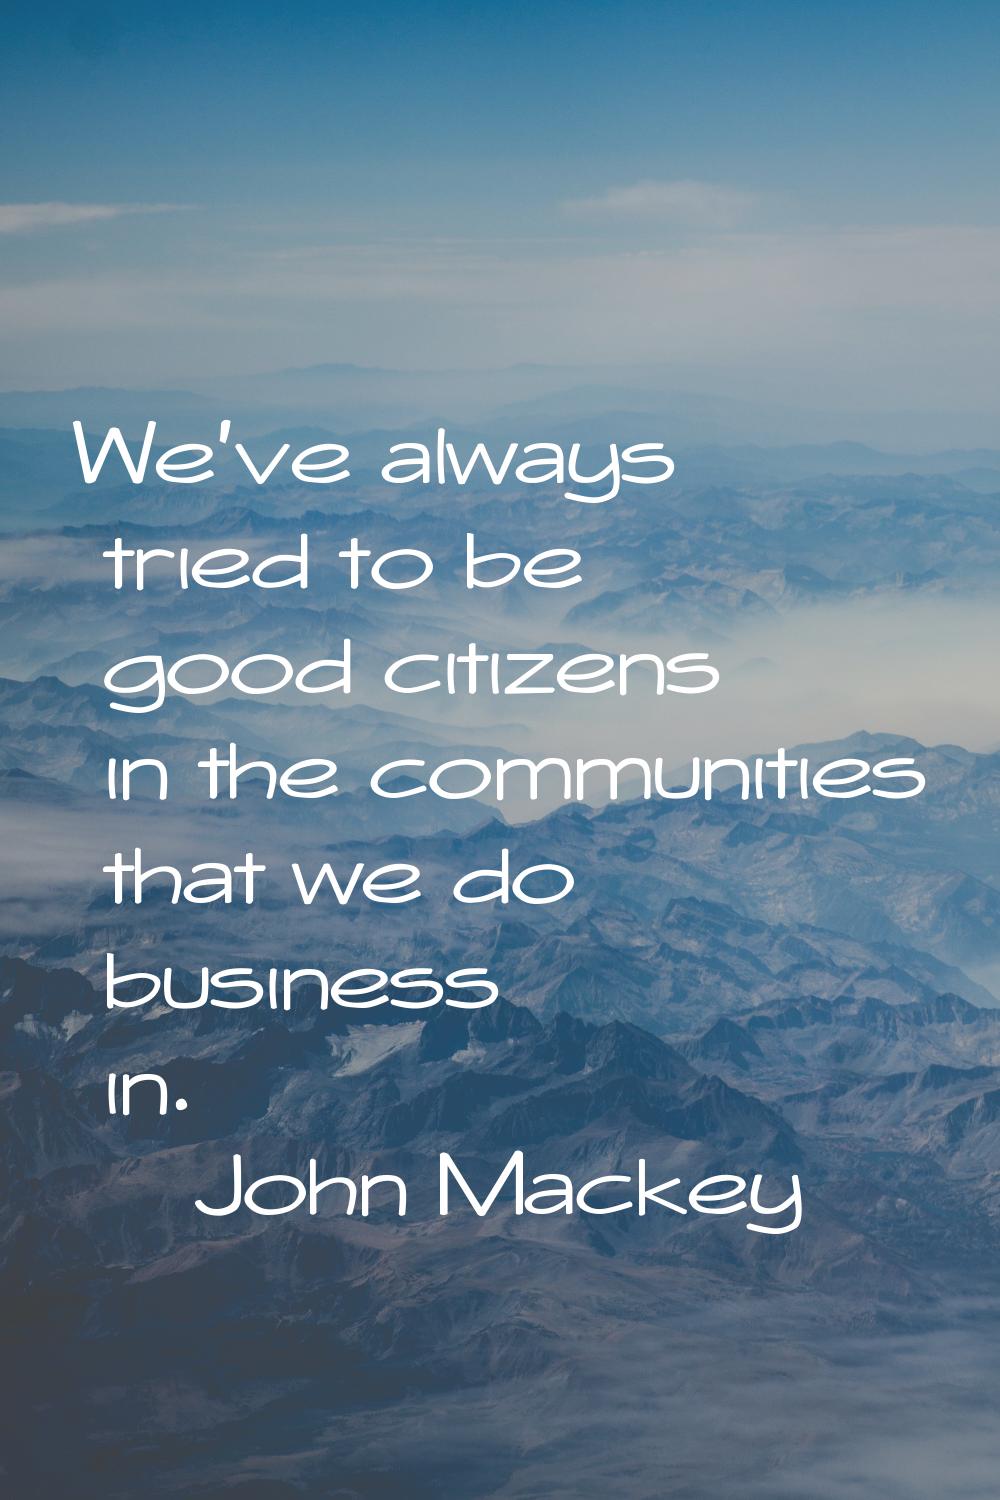 We've always tried to be good citizens in the communities that we do business in.